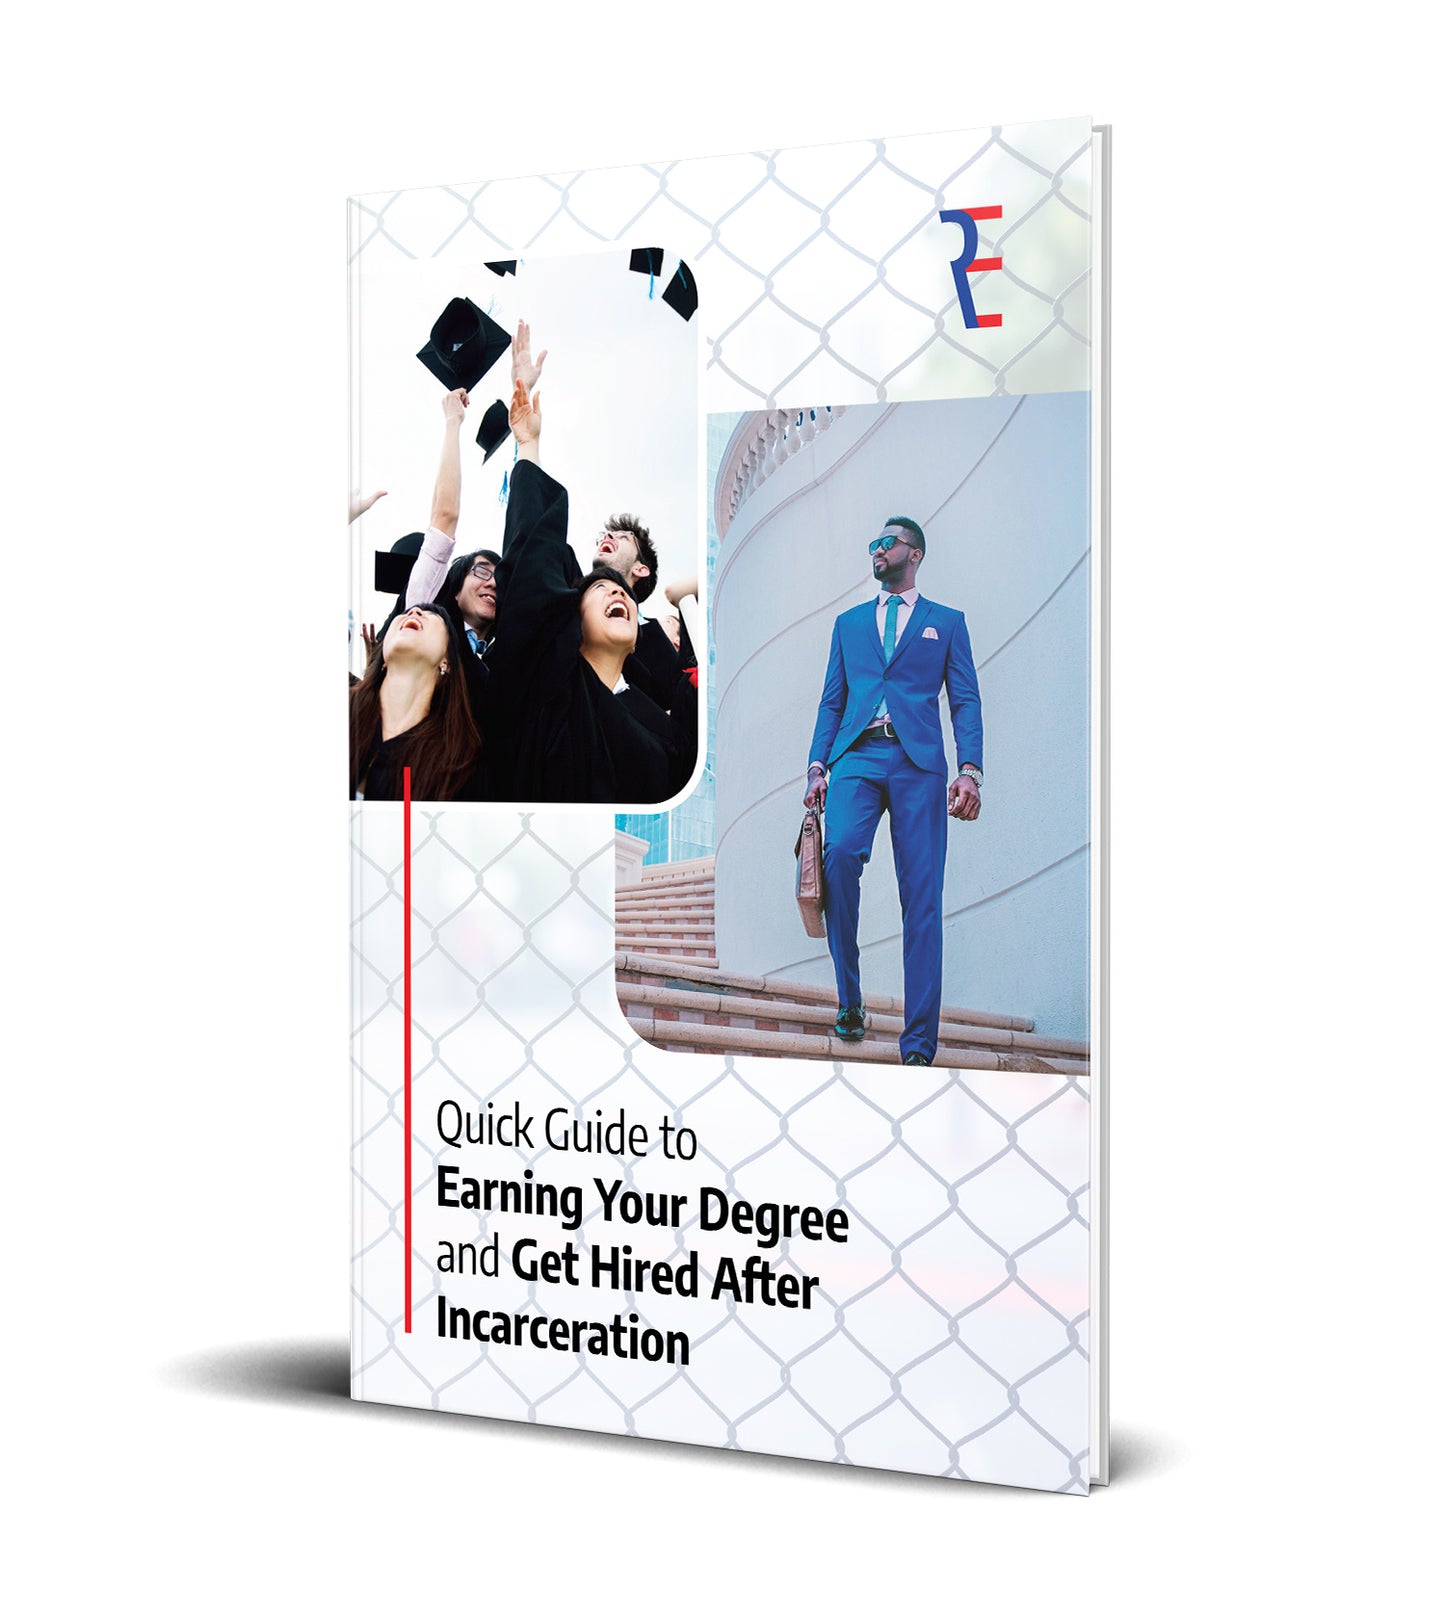 QUICK GUIDE TO EARNING YOUR DEGREE AND GET HIRED AFTER INCARCERATION